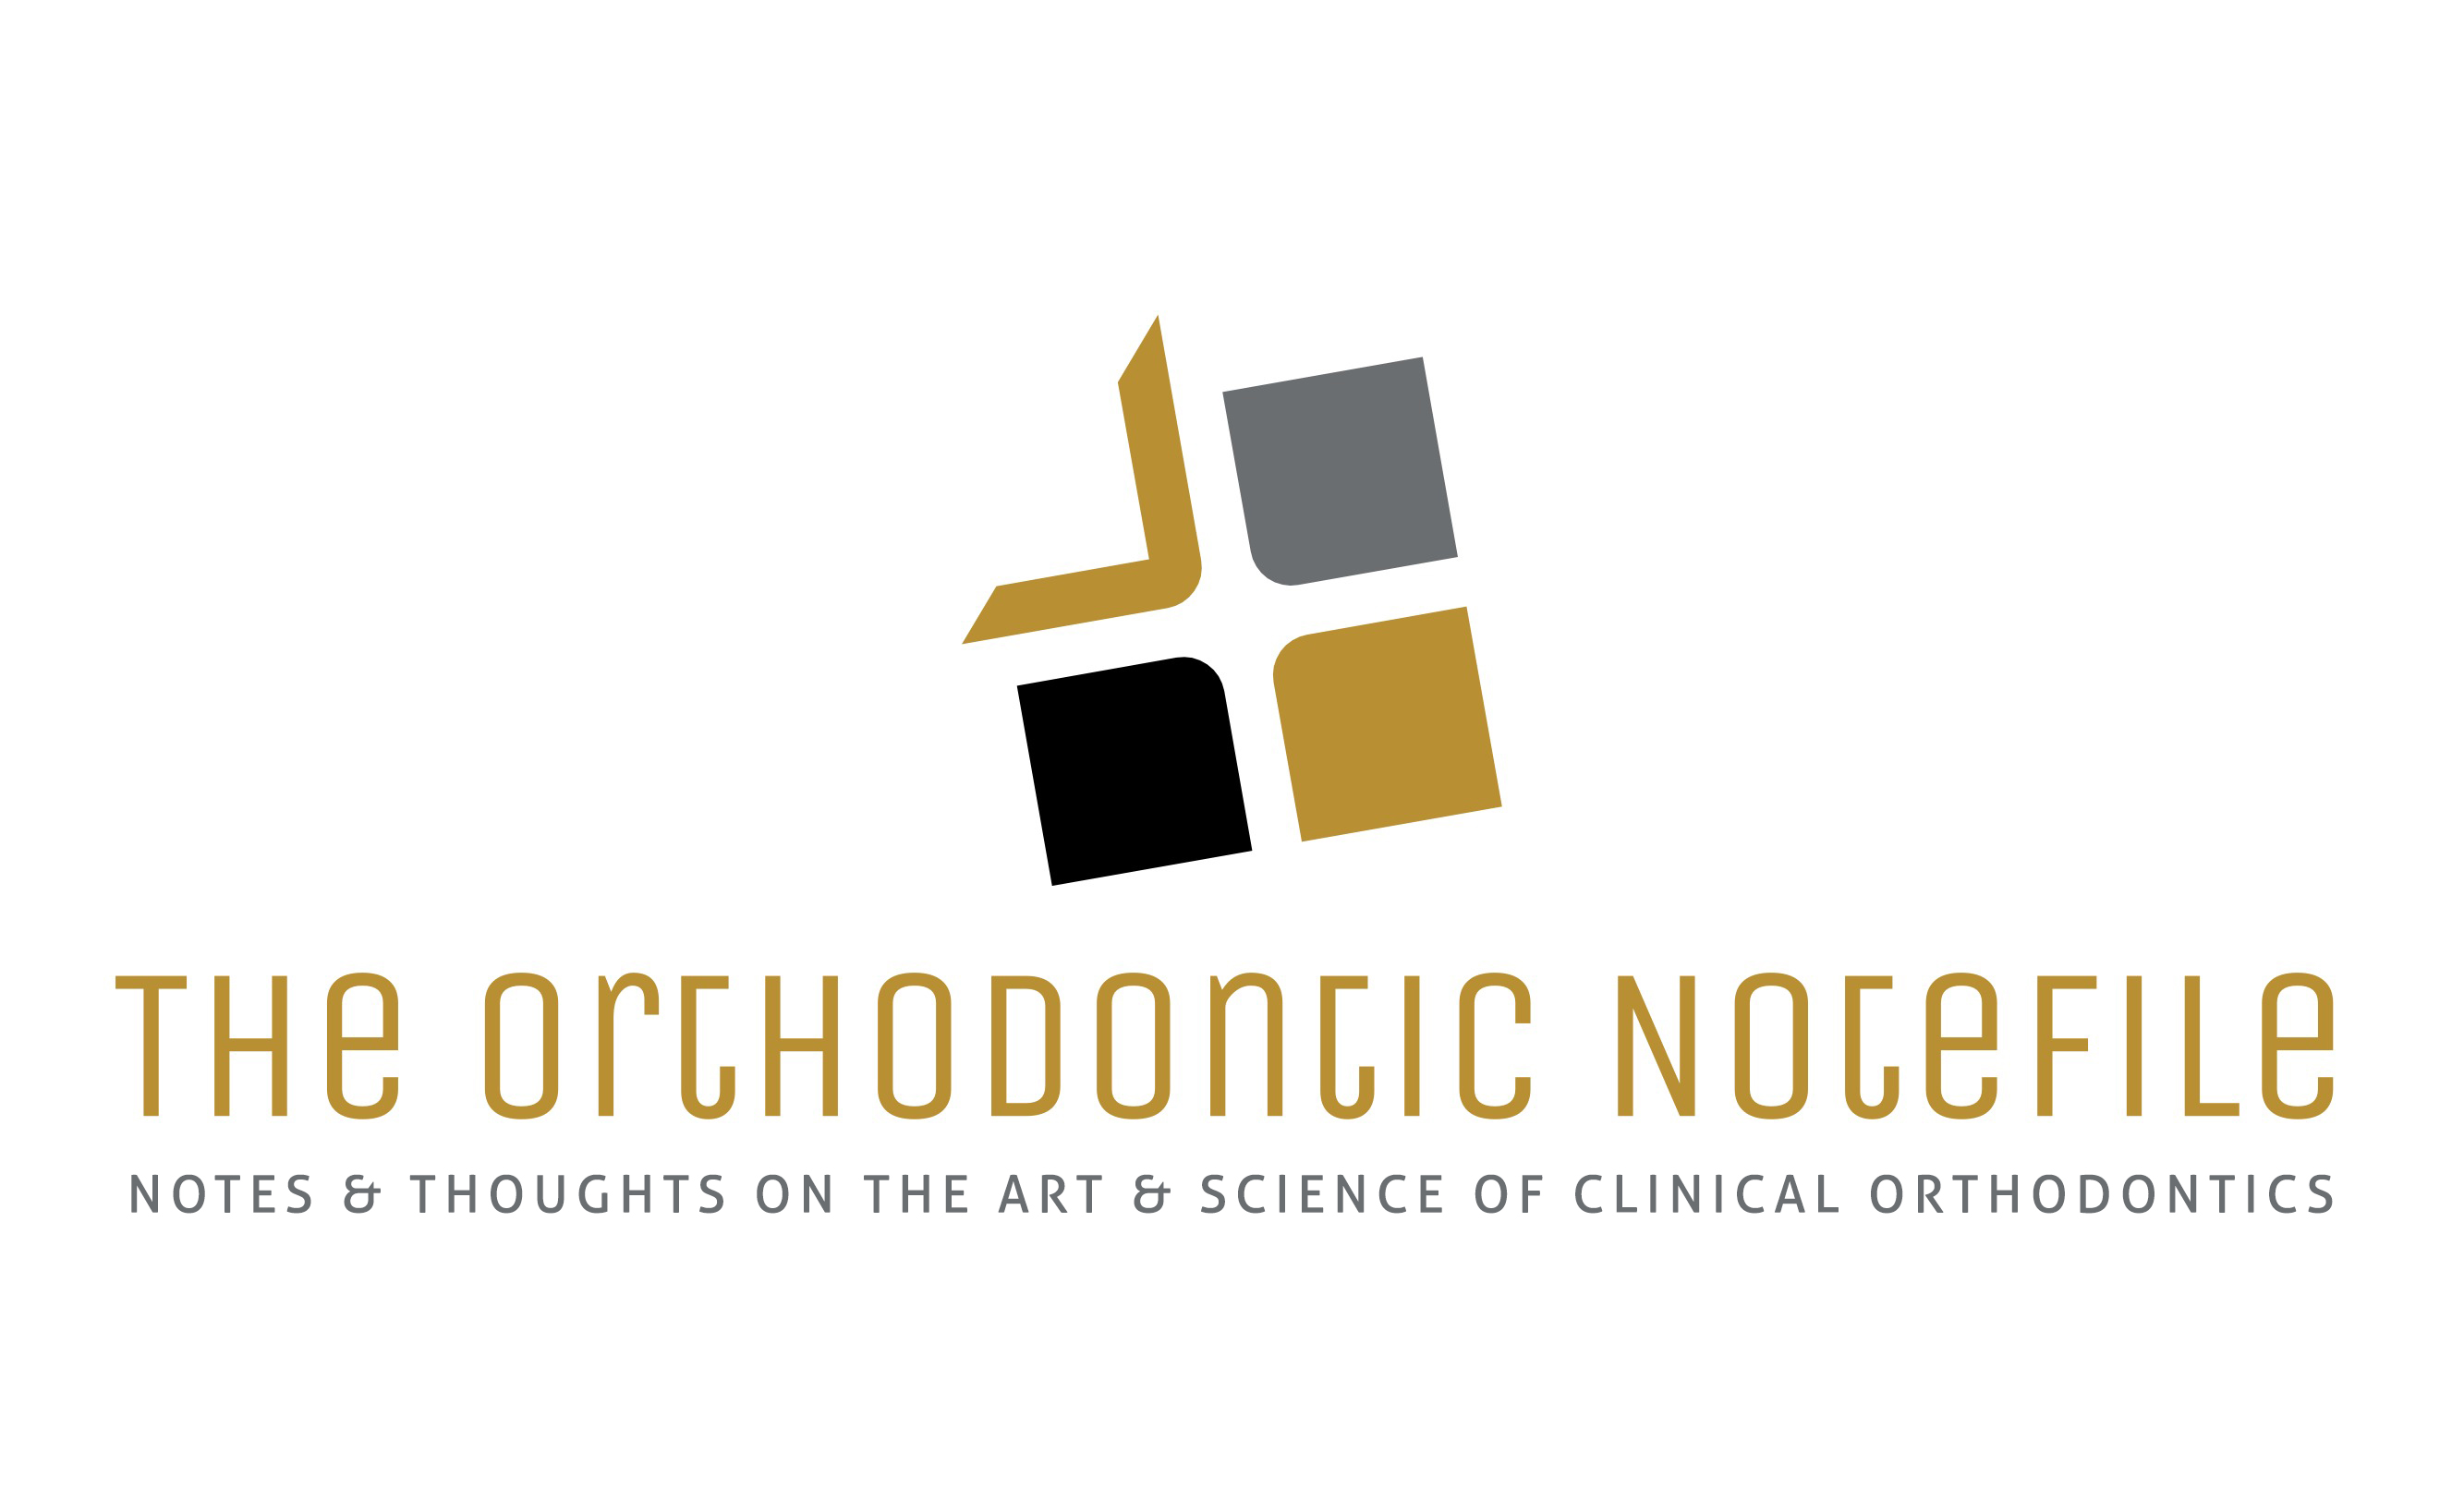 The Orthodontic Notefile